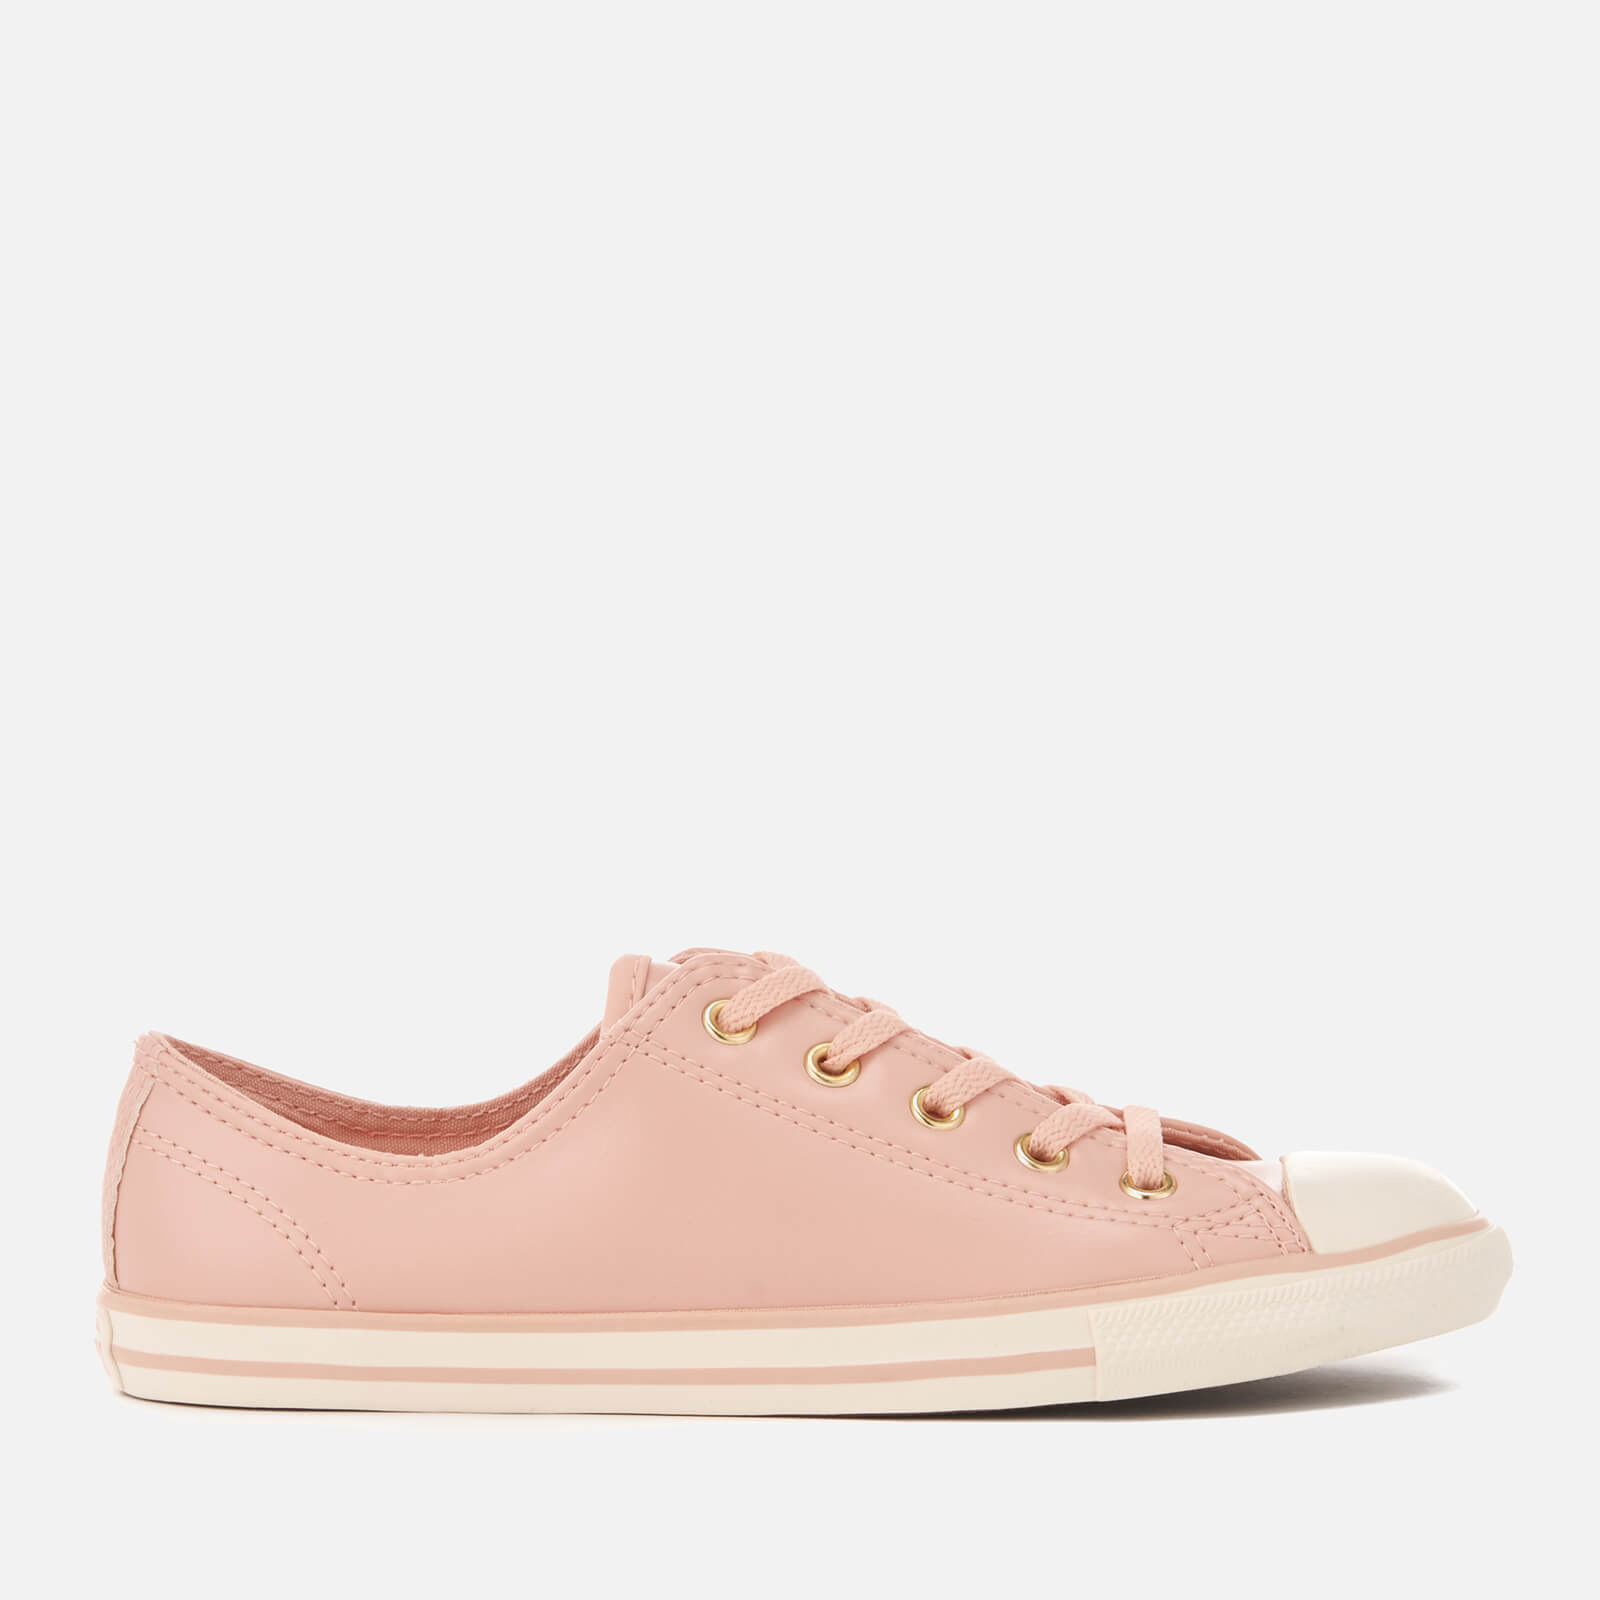 converse dainty rose gold